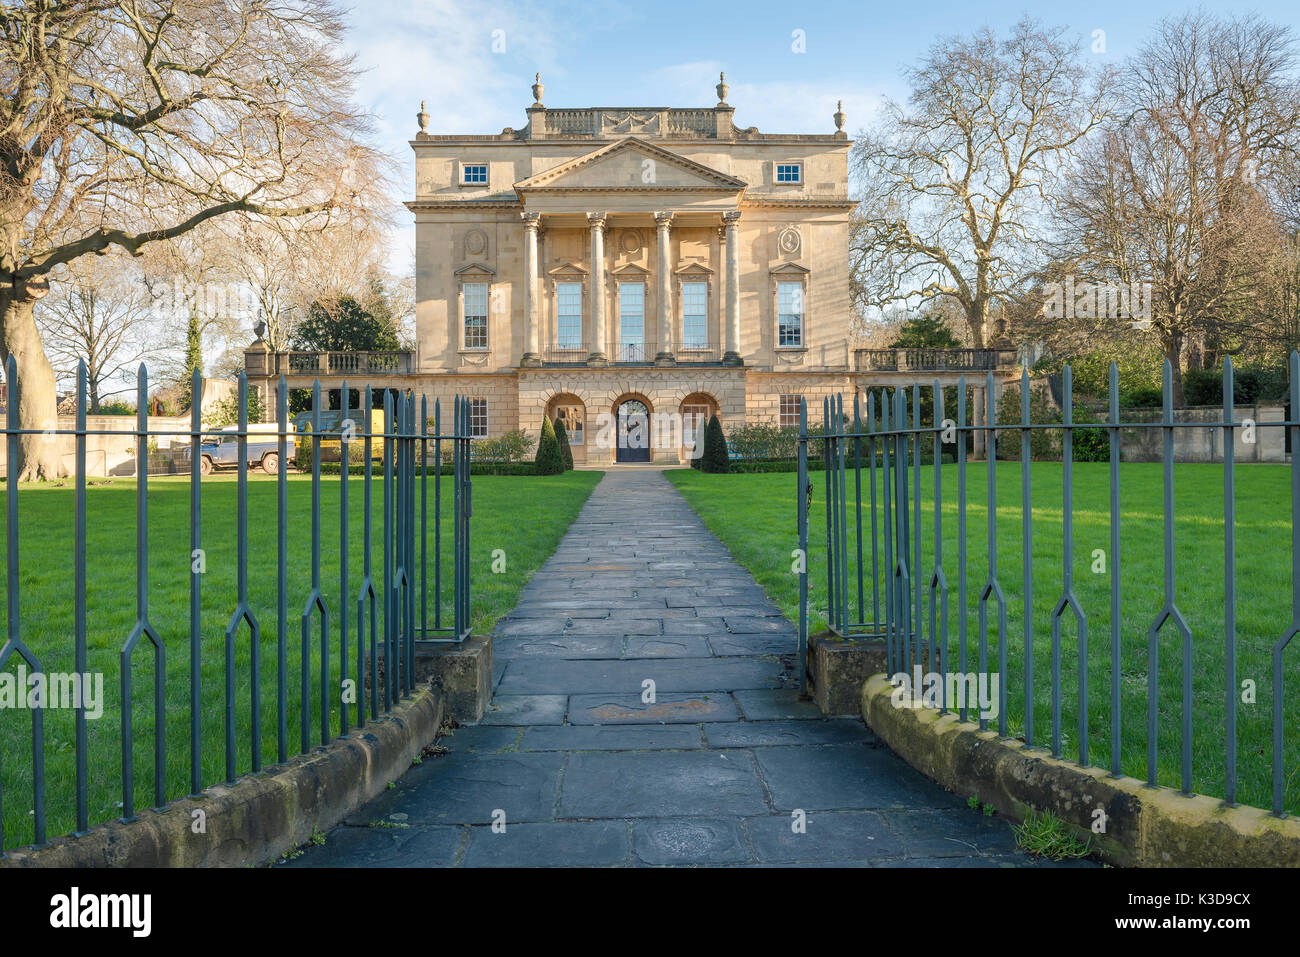 The Holburne Museum in Bath UK, a grand Georgian Palladian style building that now contains the city's extensive art gallery. Stock Photo